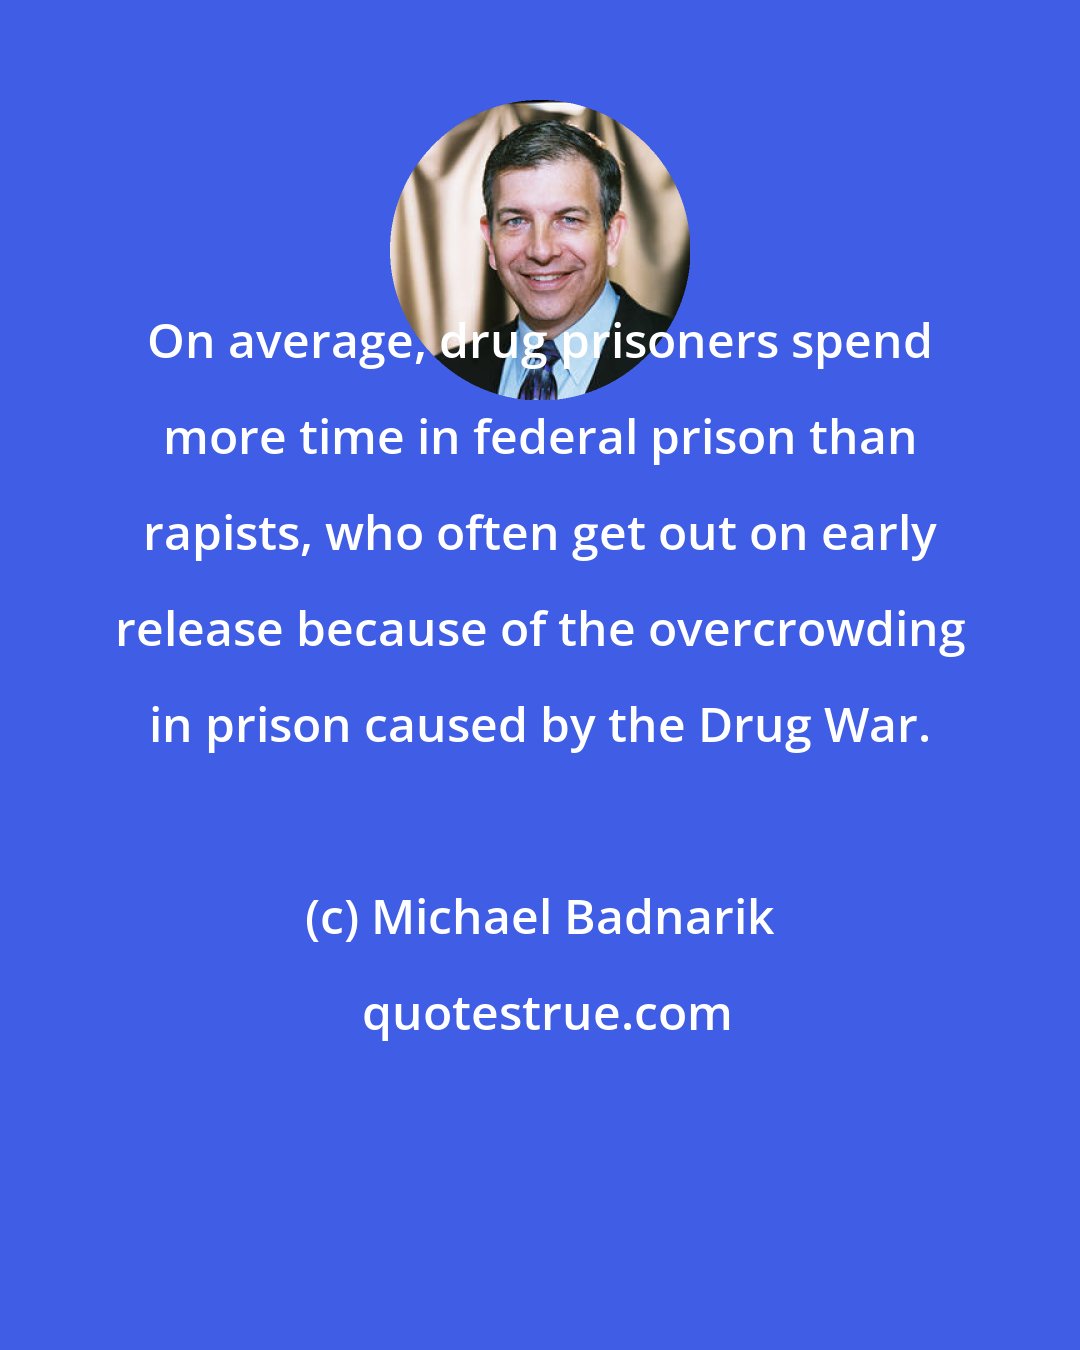 Michael Badnarik: On average, drug prisoners spend more time in federal prison than rapists, who often get out on early release because of the overcrowding in prison caused by the Drug War.